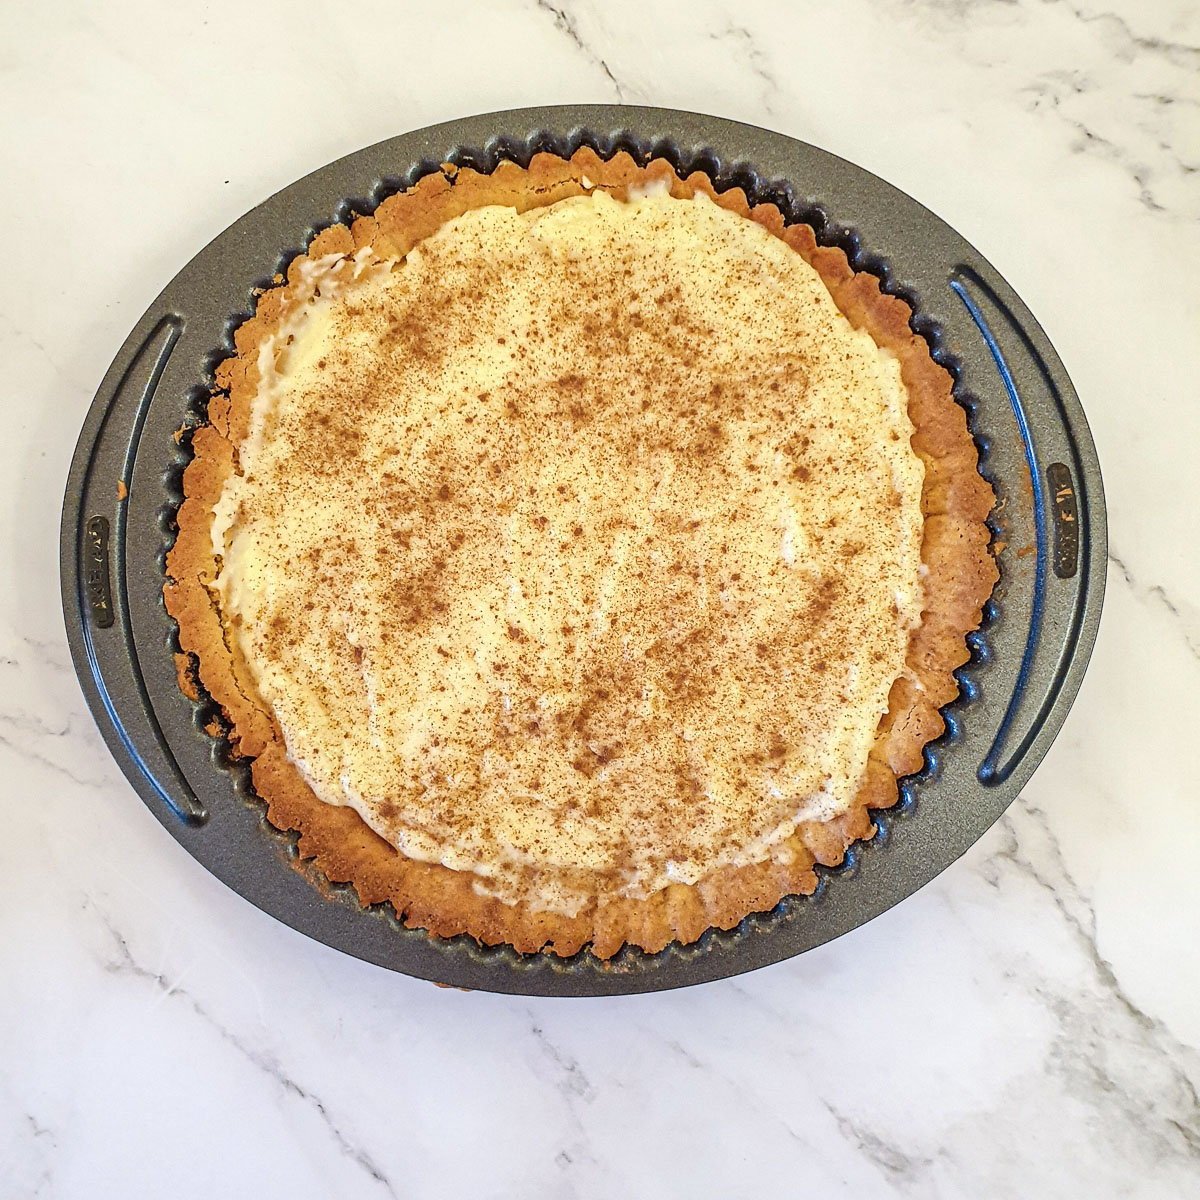 The completed milk tart sprinkled with cinnamon